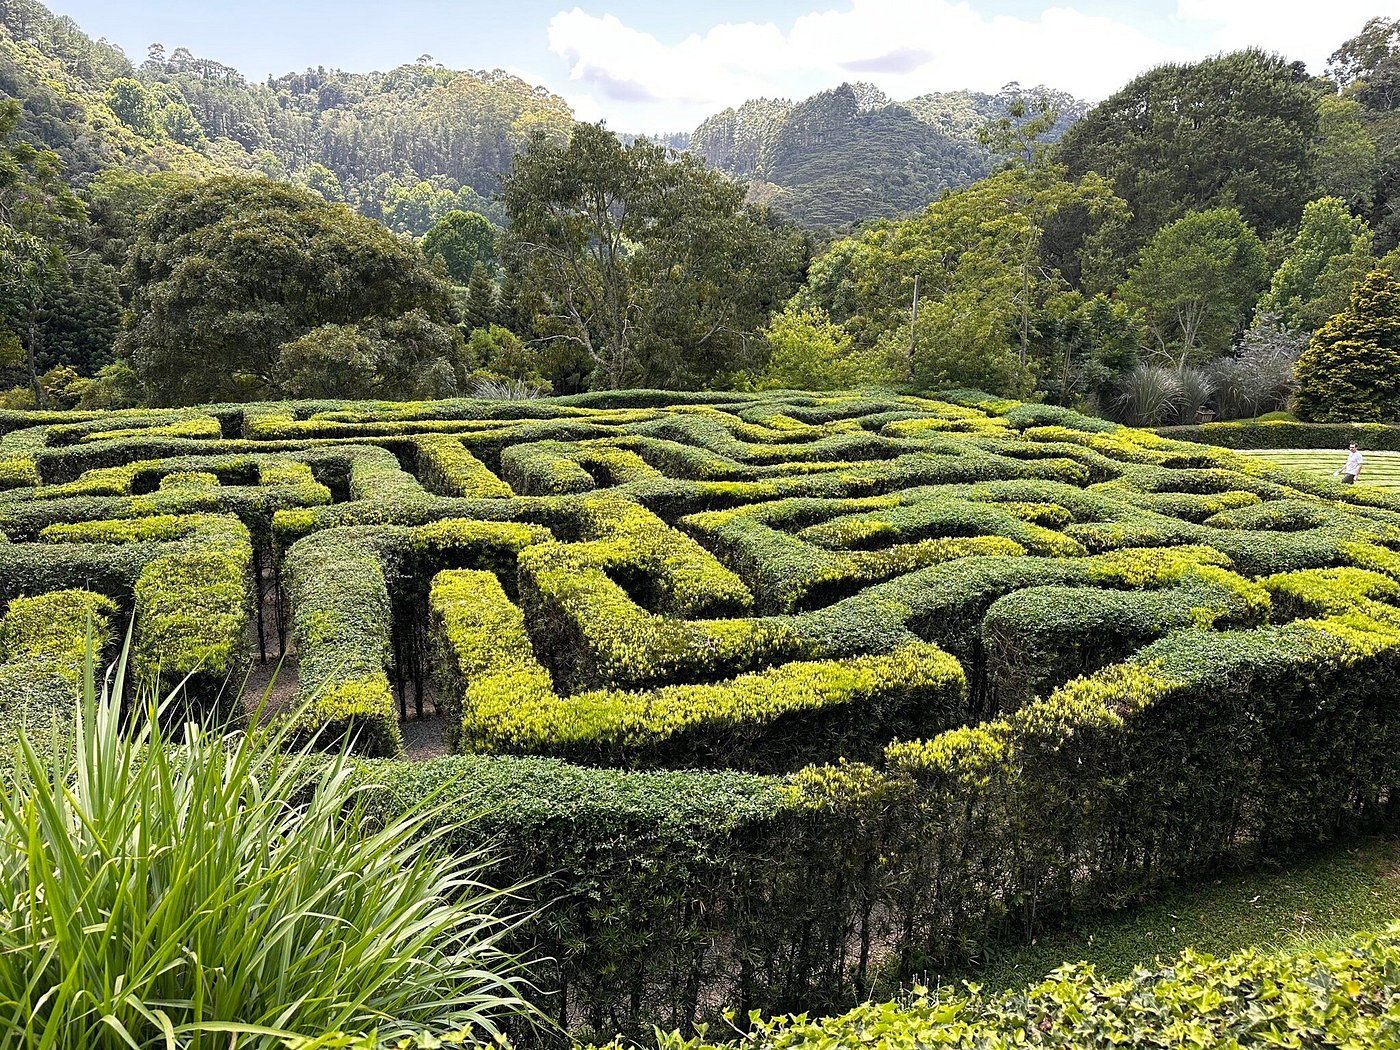 Hedge maze with some color in bushes